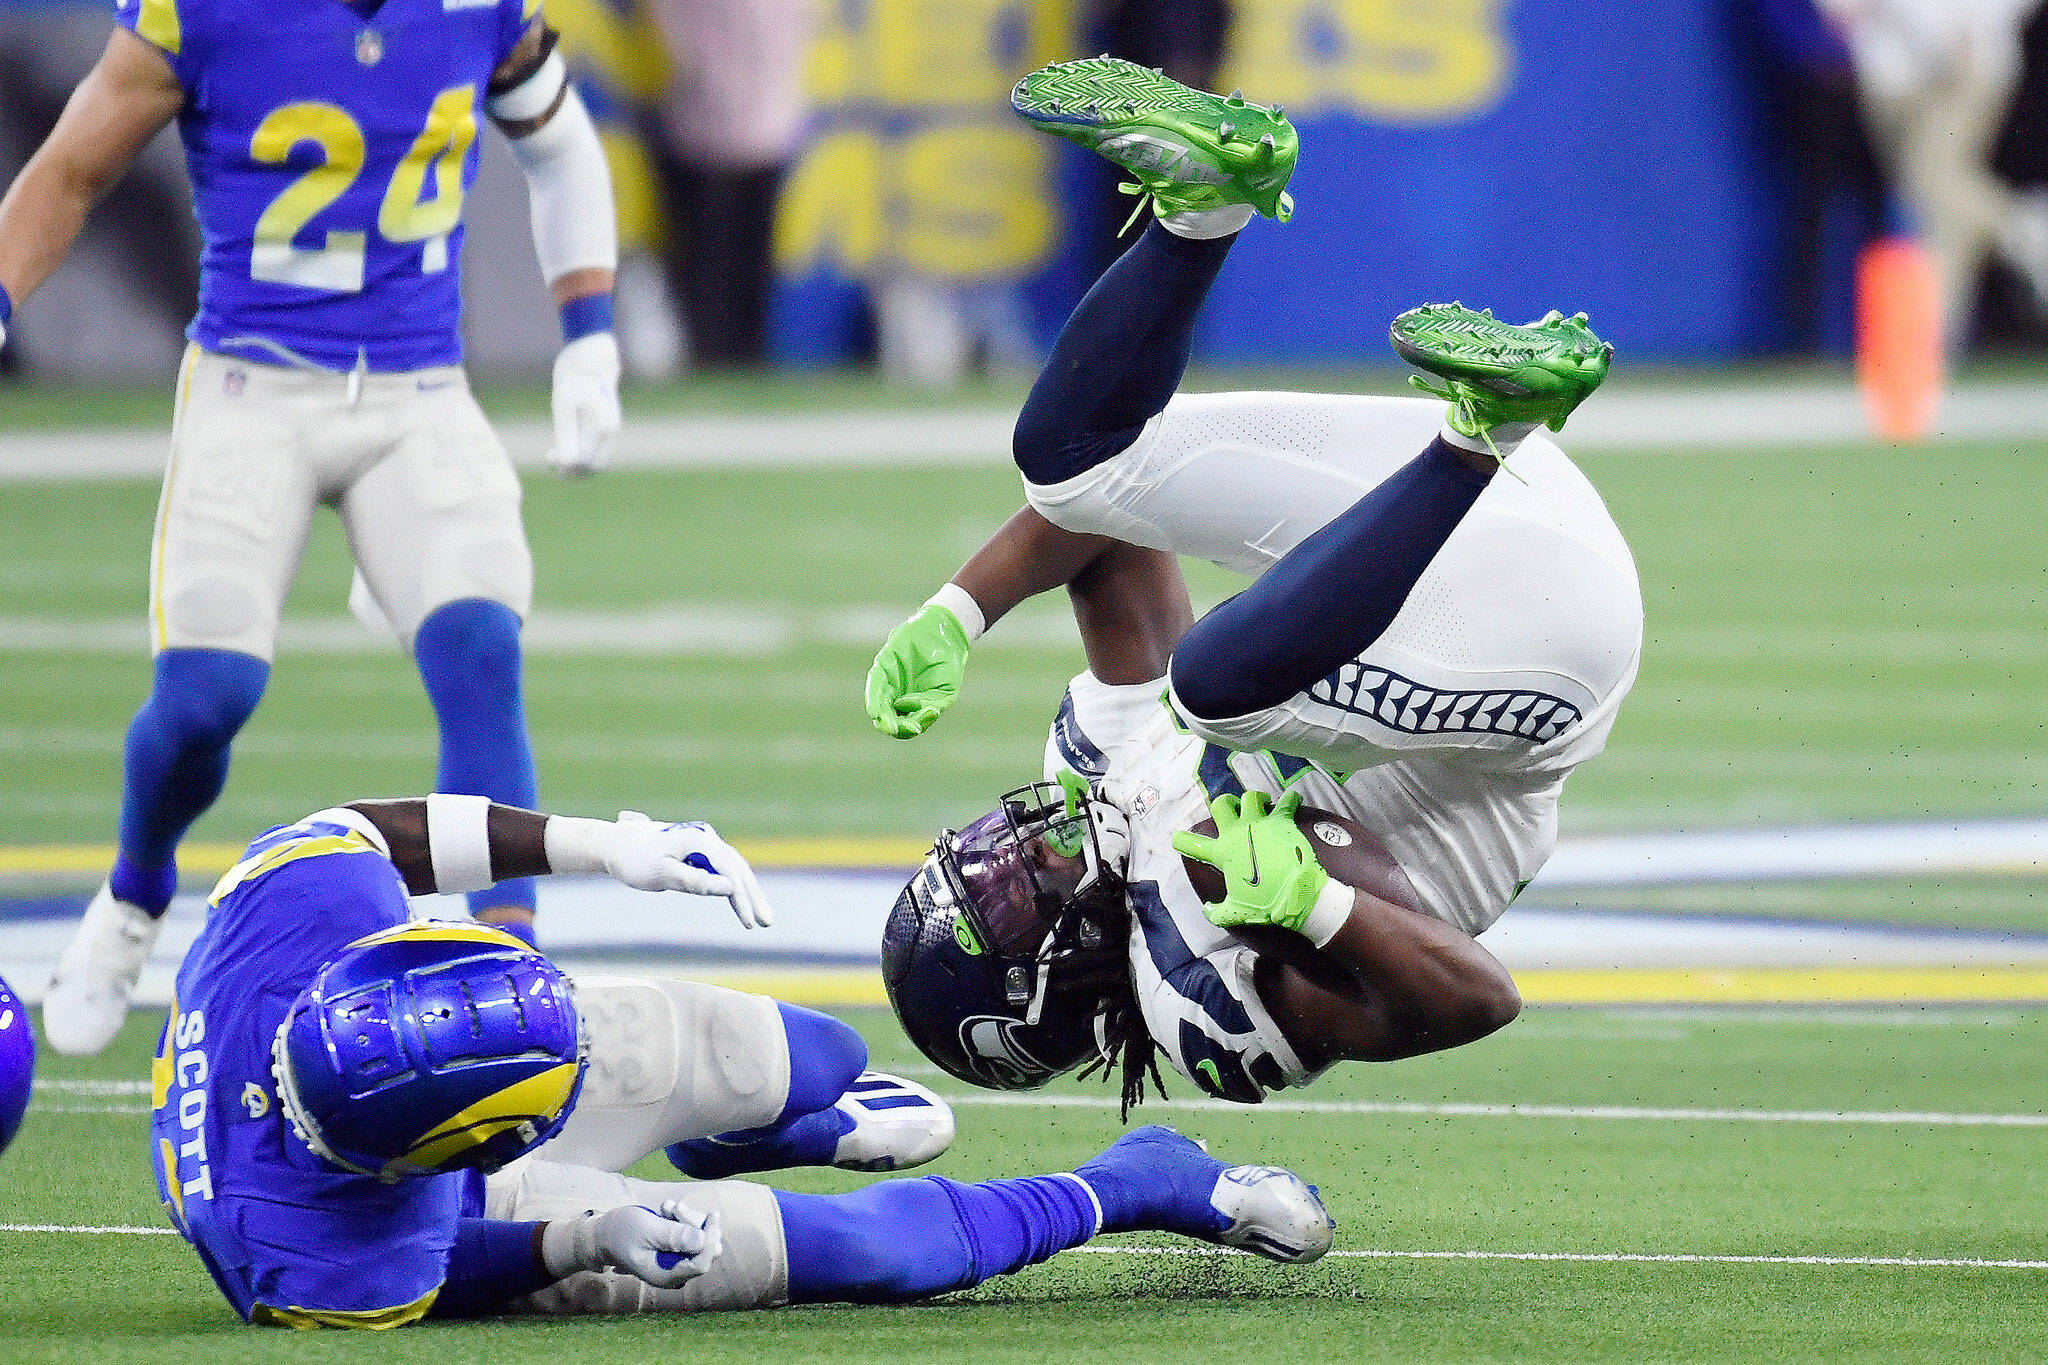 Seahawks running back DeeJay Dallas flips over as he is tackled by Rams safety Nick Scott during the second half of a game Tuesday in Inglewood, Calif. (AP Photo/Kevork Djansezian)